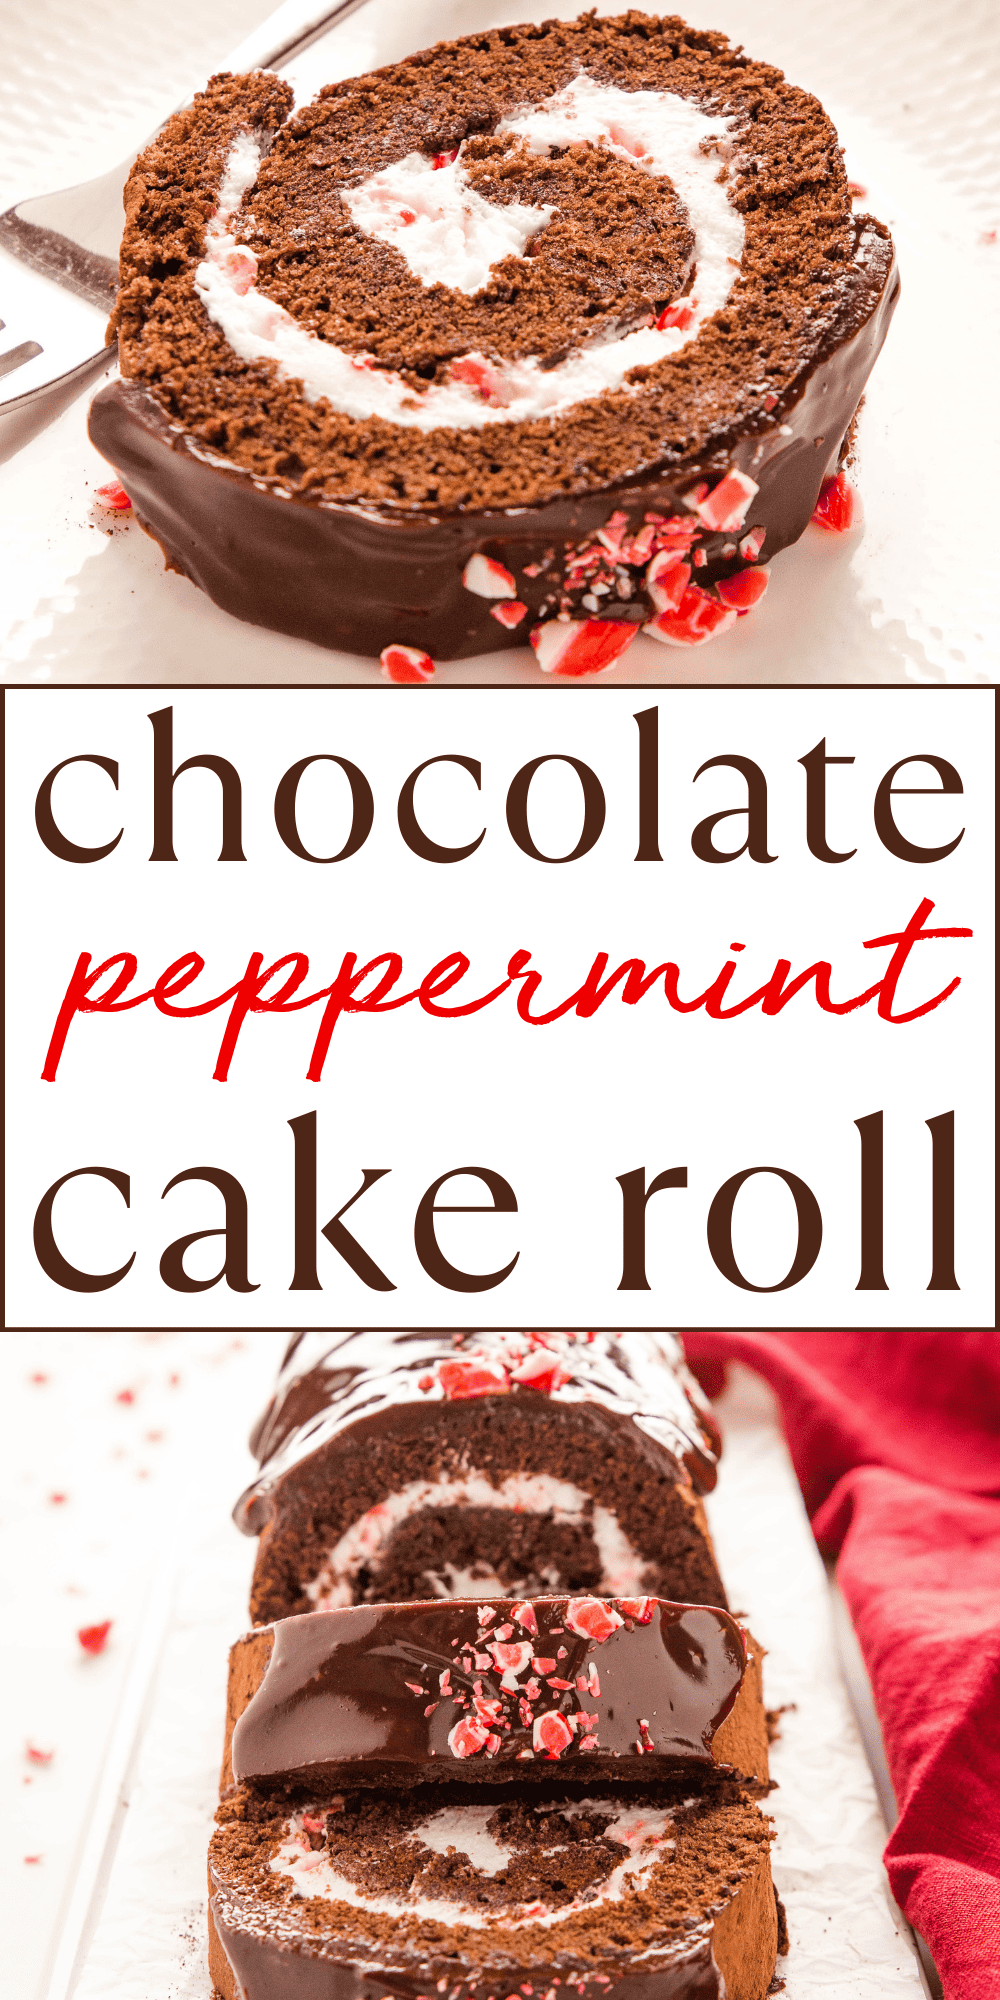 This Peppermint Chocolate Swiss Roll cake recipe is a classic dessert with a holiday twist! Made with a moist and tender chocolate sponge cake rolled with light and fluffy whipped cream, all flavoured with peppermint. Follow our pro tips and tricks for the perfect Peppermint Chocolate Swiss Roll! Recipe from thebusybaker.ca! #chocolateswissroll #swissroll #chocolateroll #chocolatecakeroll #cakeroll #swissrollrecipe #protips #bakingtips #howtomakeaswissroll #howtobake via @busybakerblog